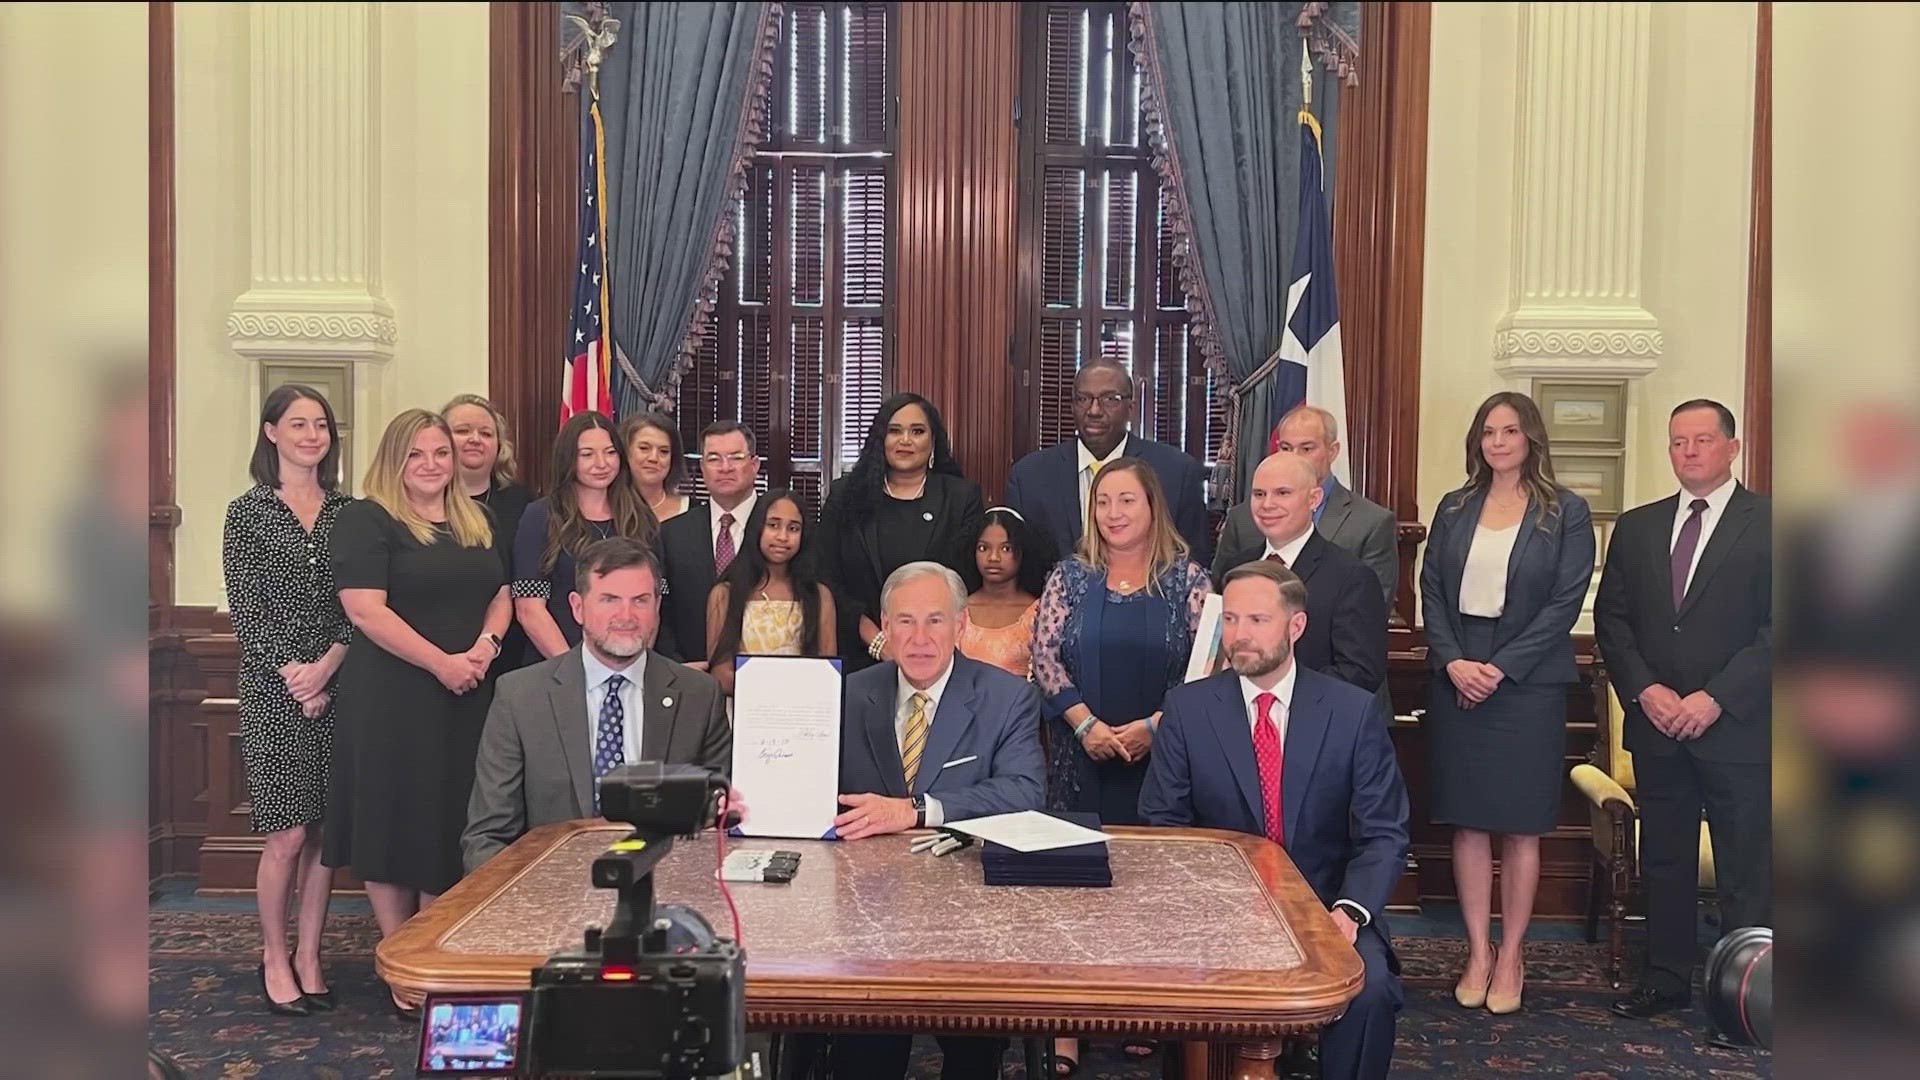 Senate Bill 838, or "Alyssa's Law," requires all Texas school districts and open-enrollment charter schools to put a silent panic buttons in classrooms.